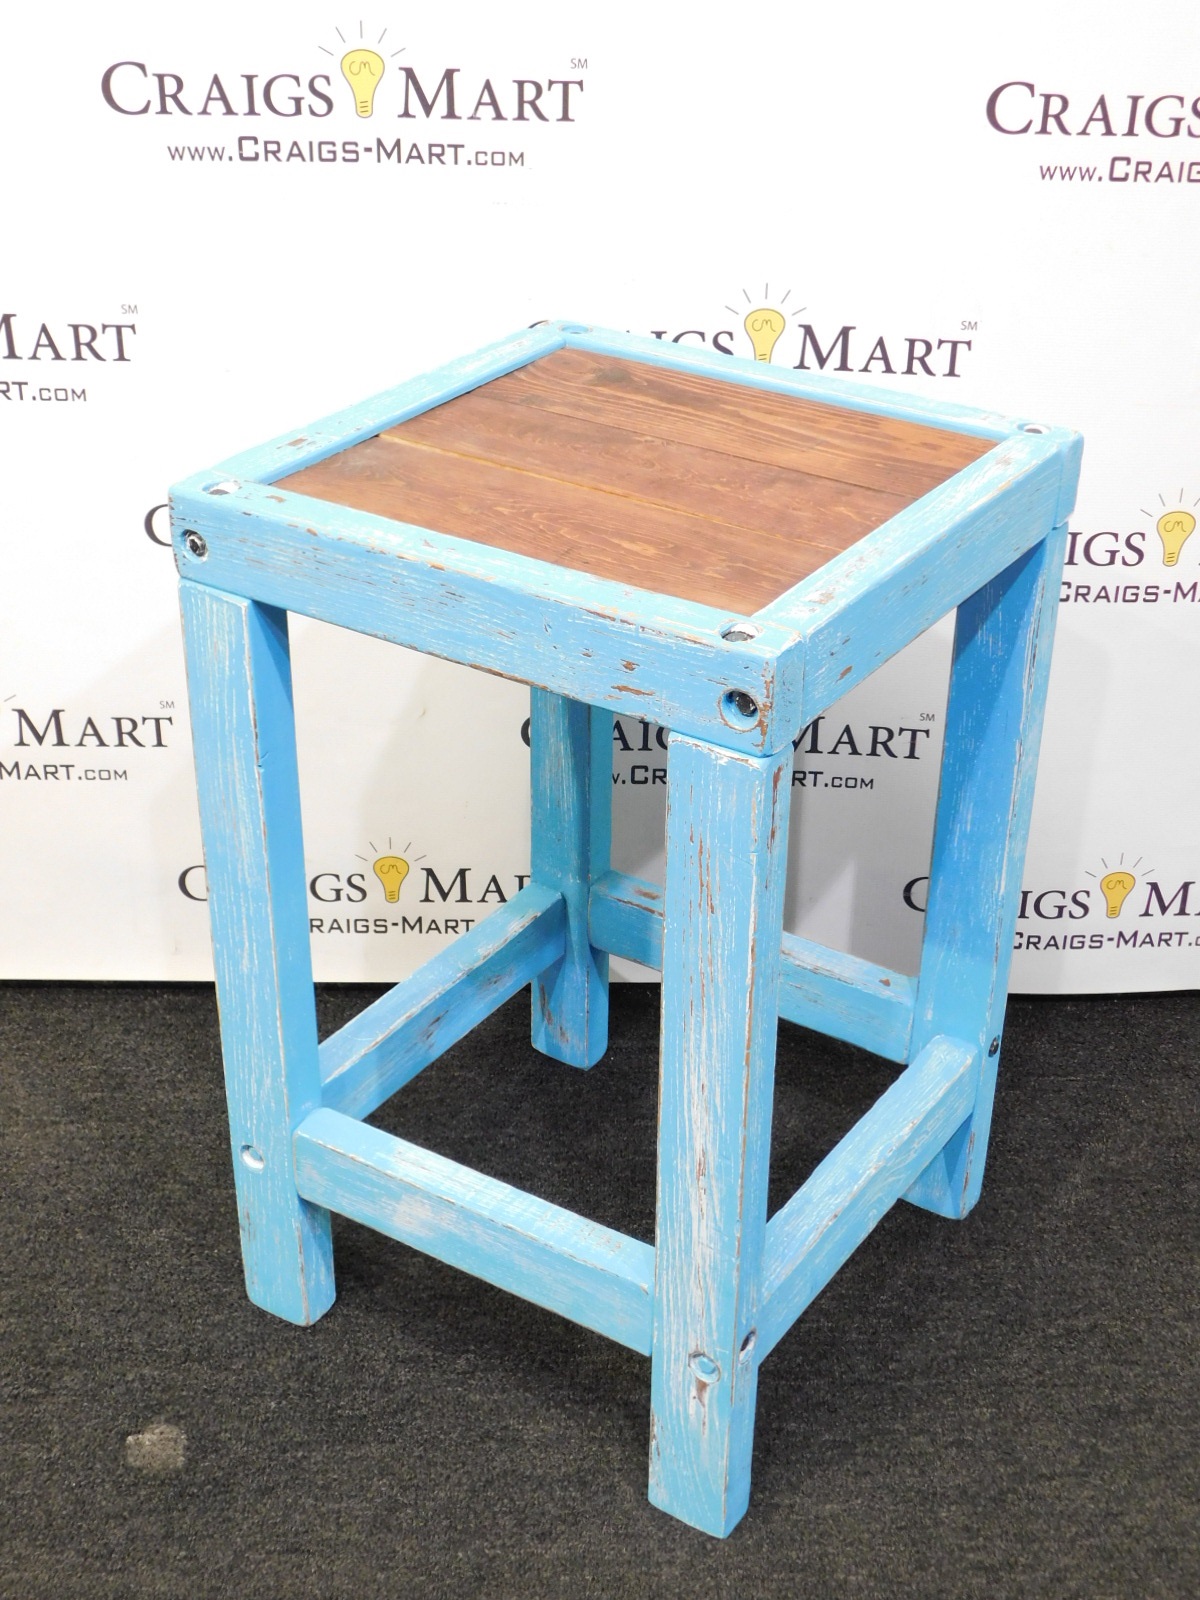 handcrafted distressed accent table mirror craigs mart blue vita silvia screen porch furniture contemporary dining room chairs pretty storage boxes ikea coffee sets nautical